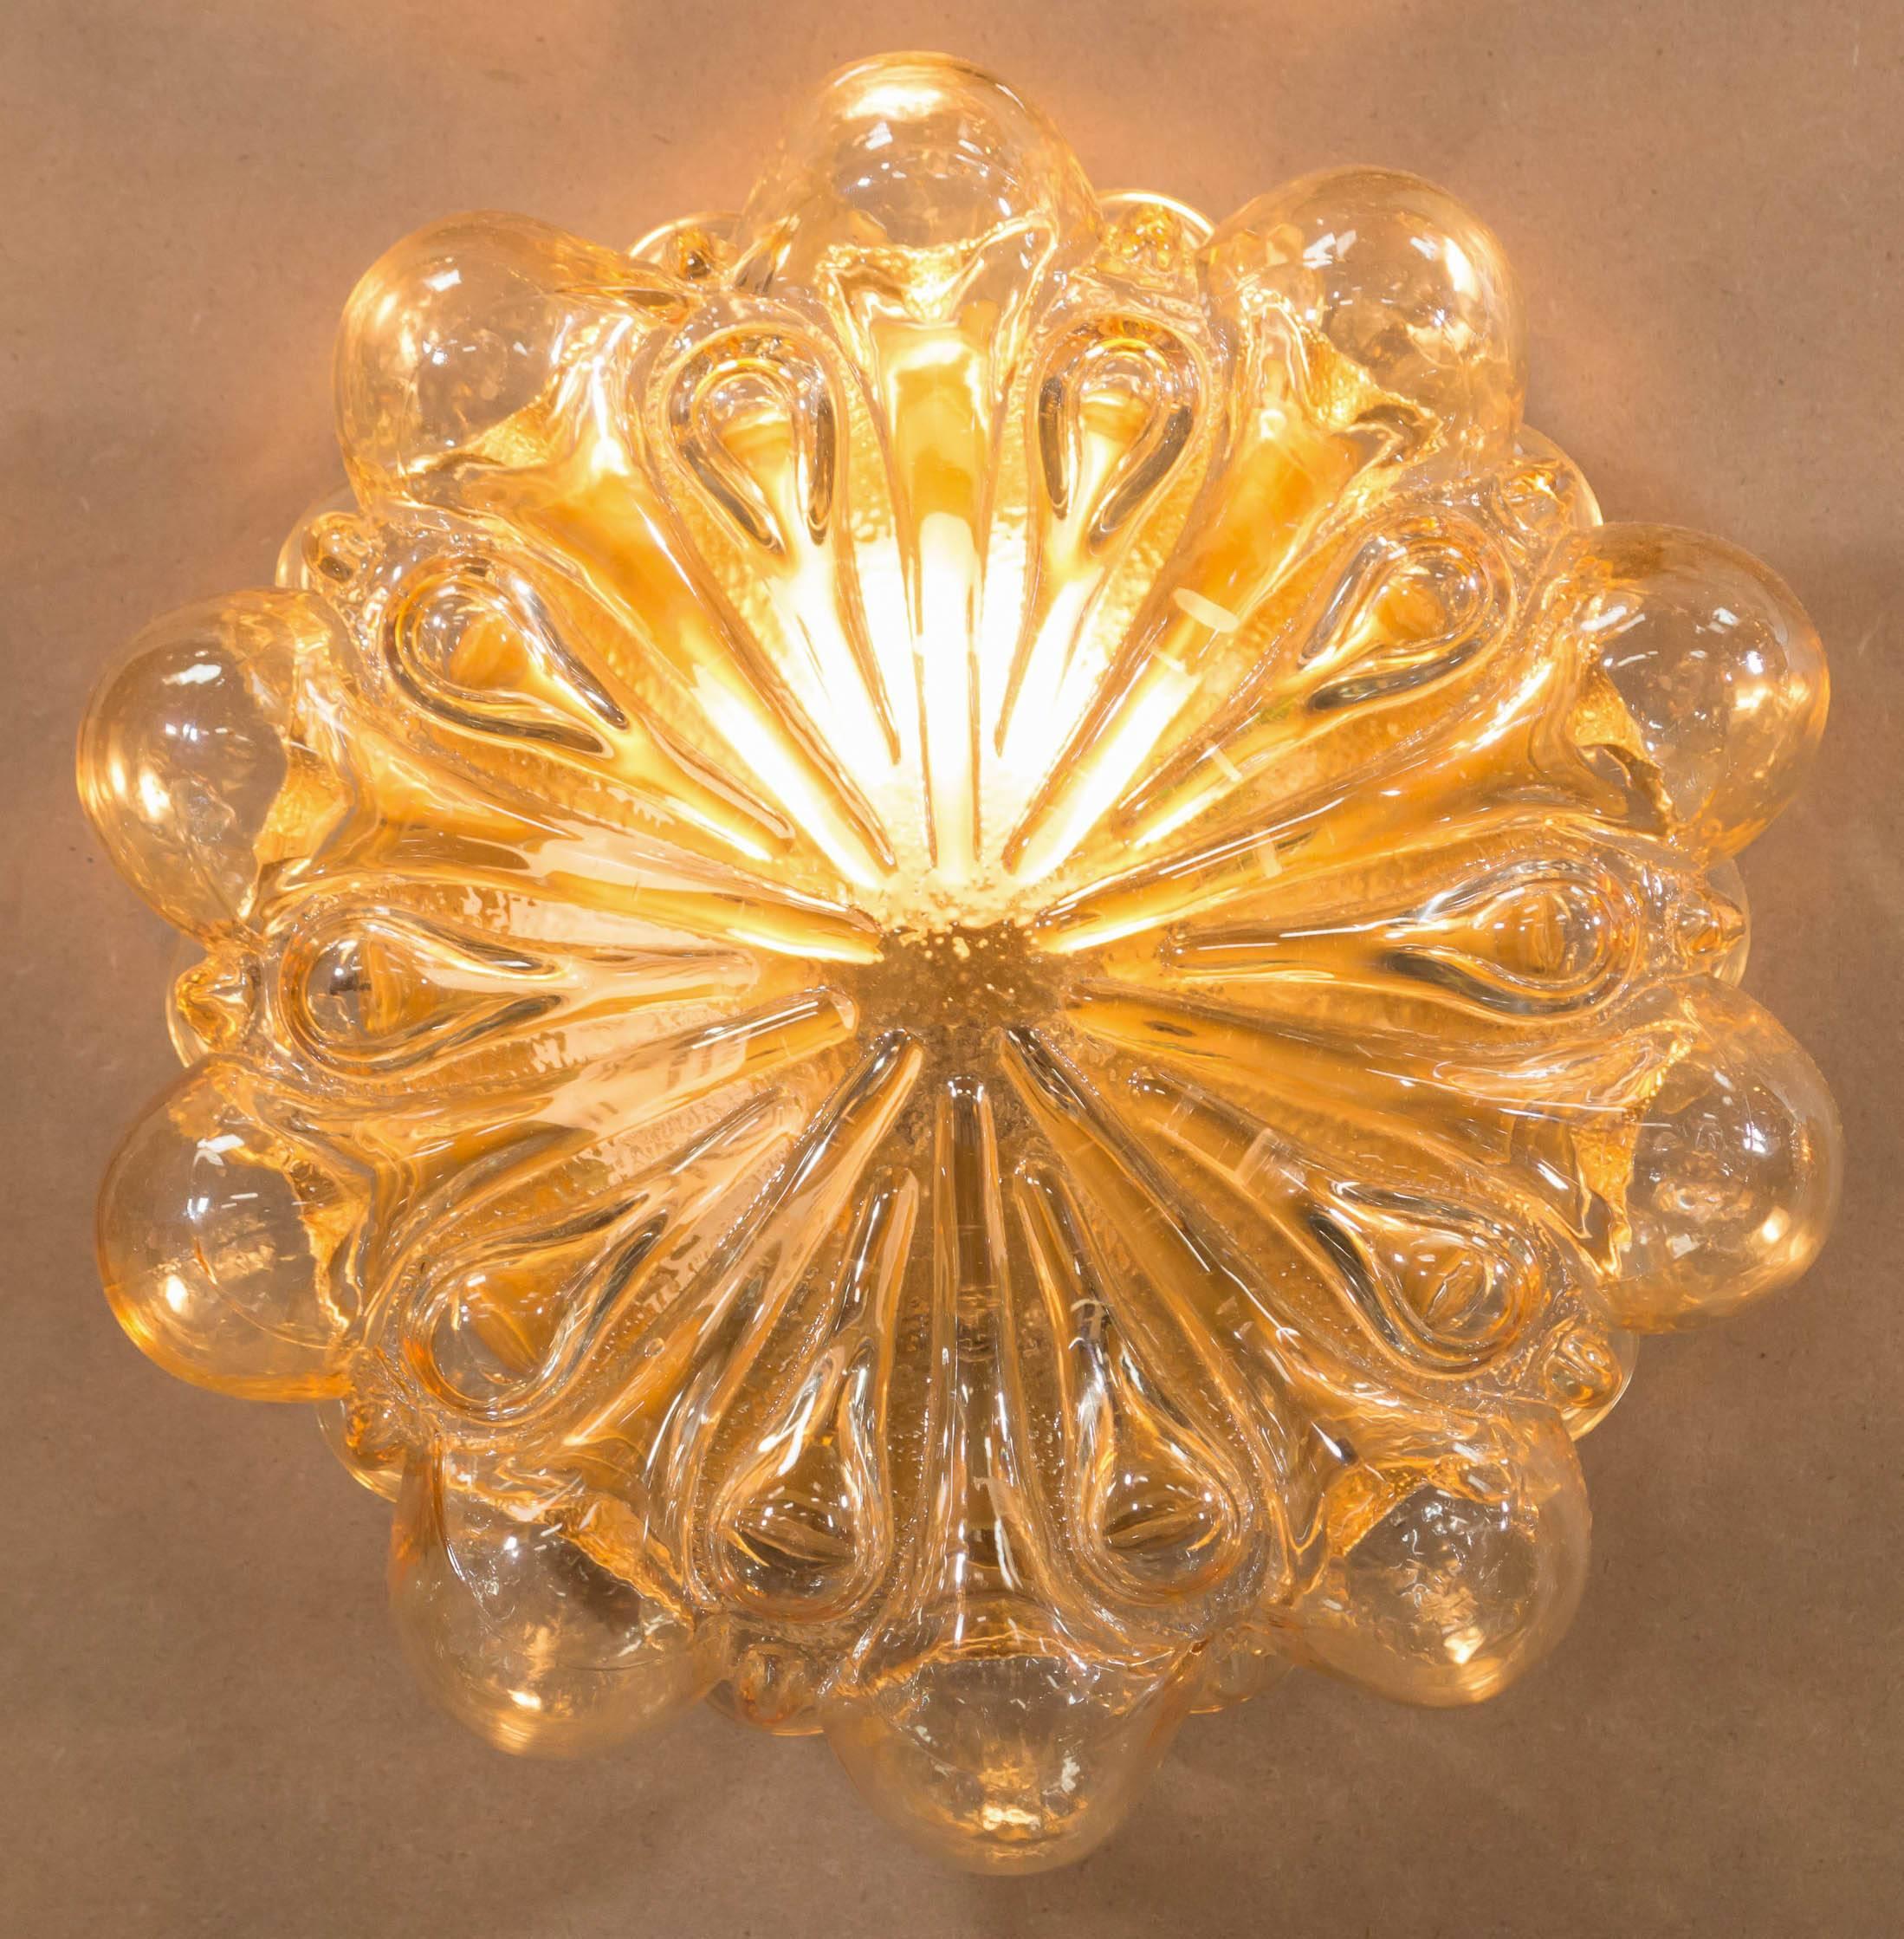 Stunning Mid-Century vintage German made bubble glass sconce that can also be used as a flush mount ceiling fixture; designed by Helena Tynell for Glashütte Limburg in the early 1960s. Featuring beautiful amber/champagne colored glass it will warm